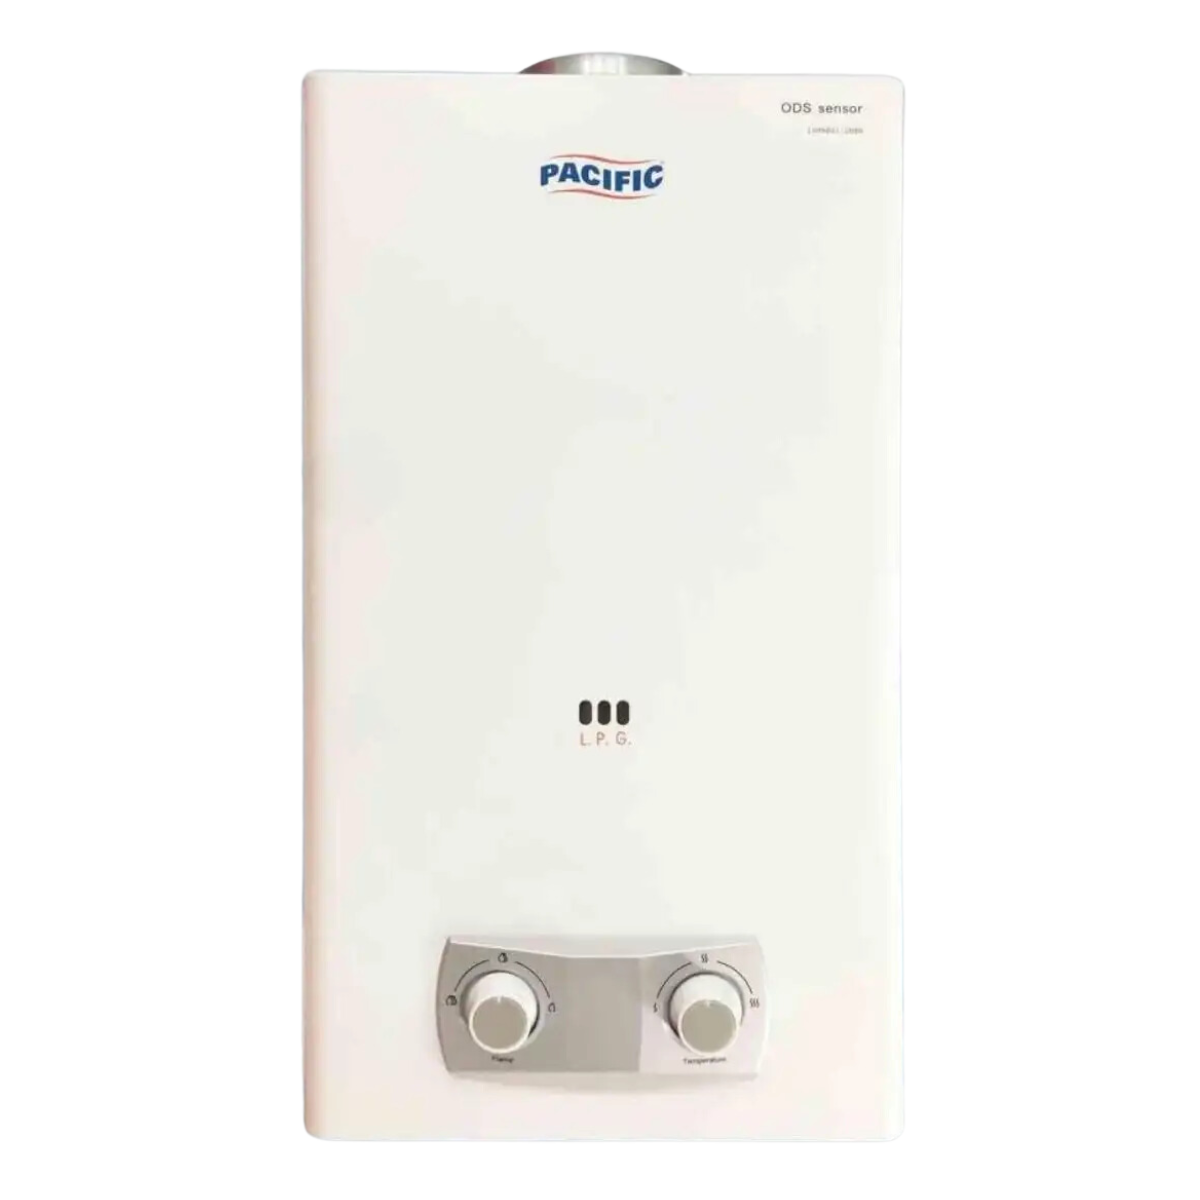 PACIFIC GAS WATER HEATER 10LTS